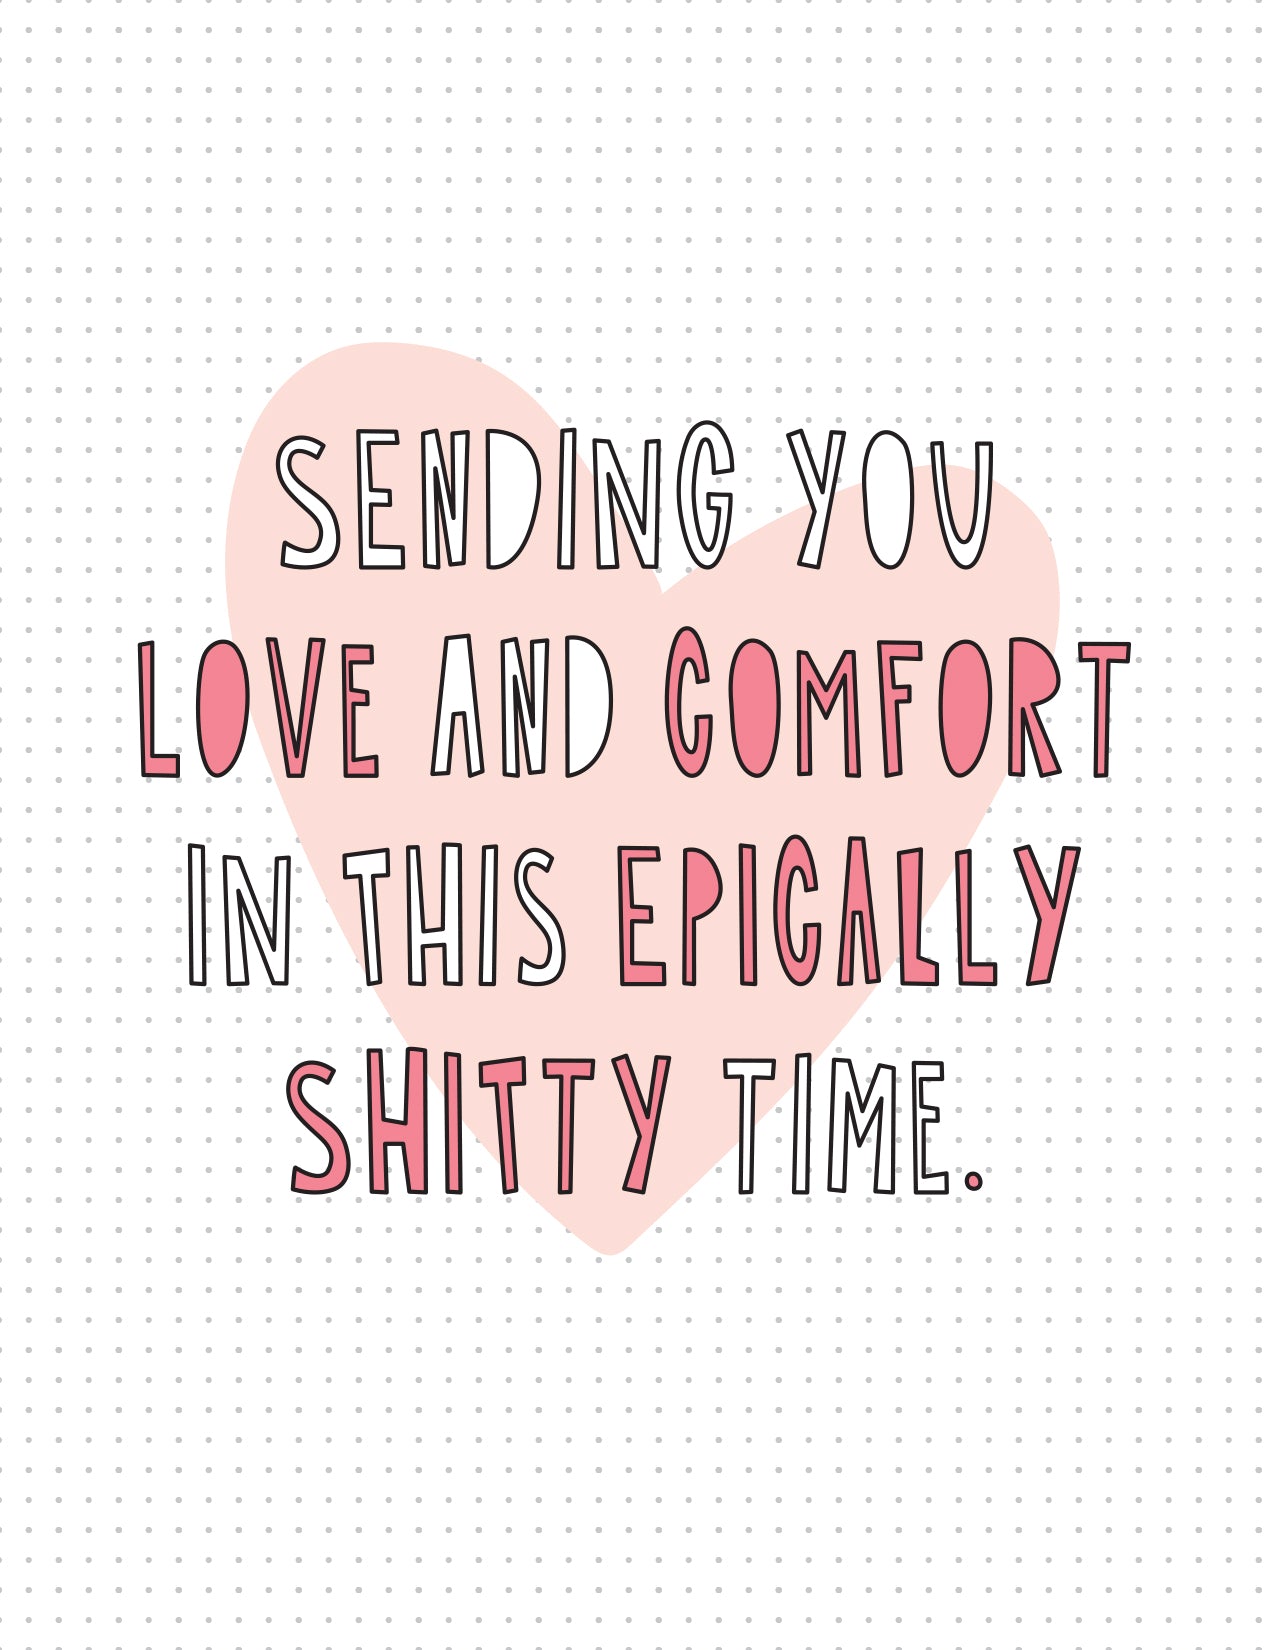 Sending You Love & Comfort In This Epically Shitty Time card